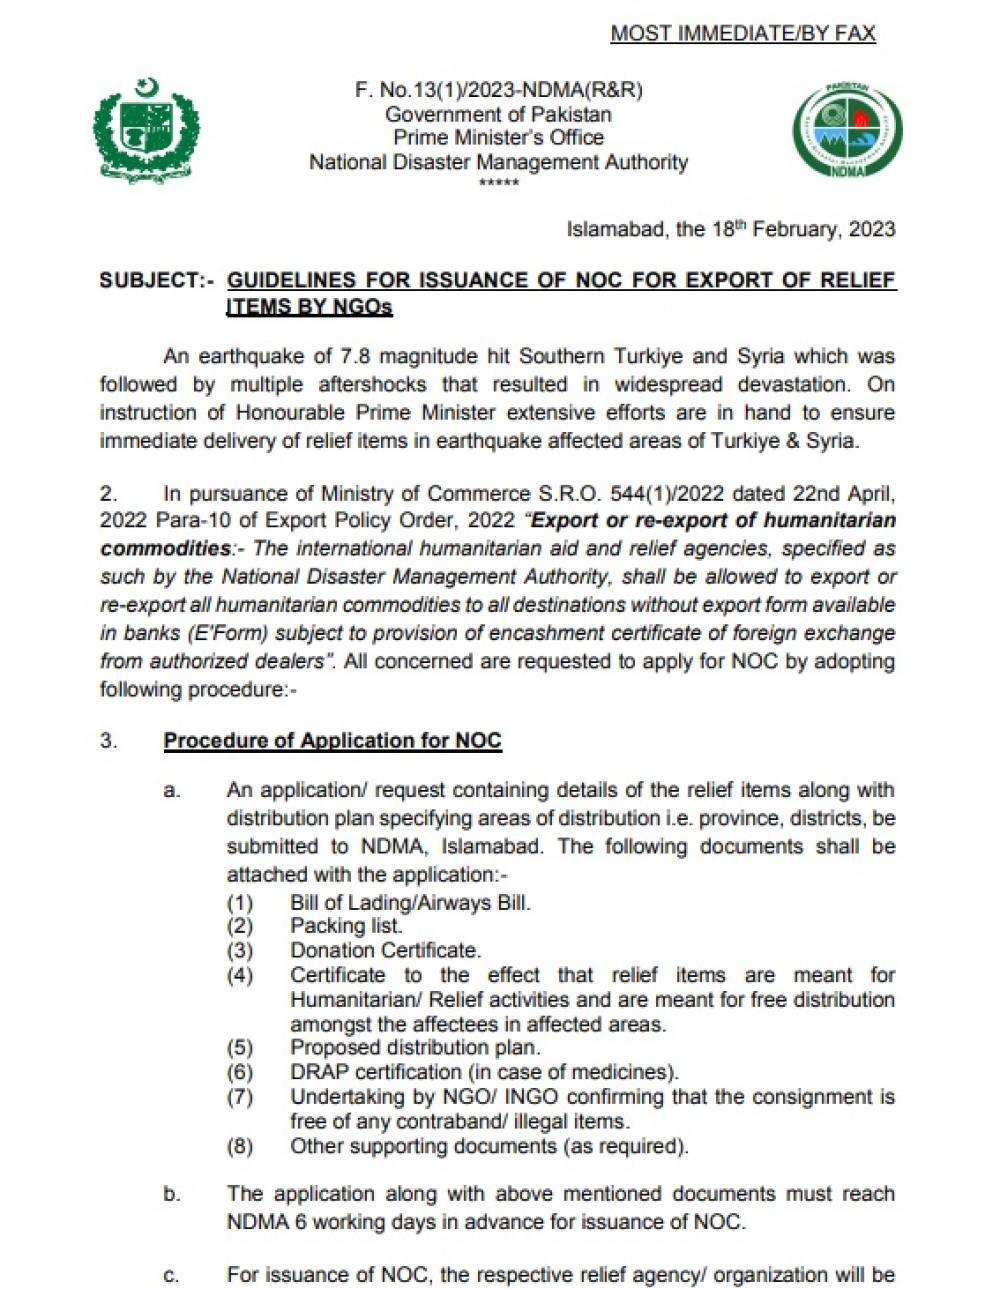 Guidelines for Issuance of NOC Relief Items by NGOS